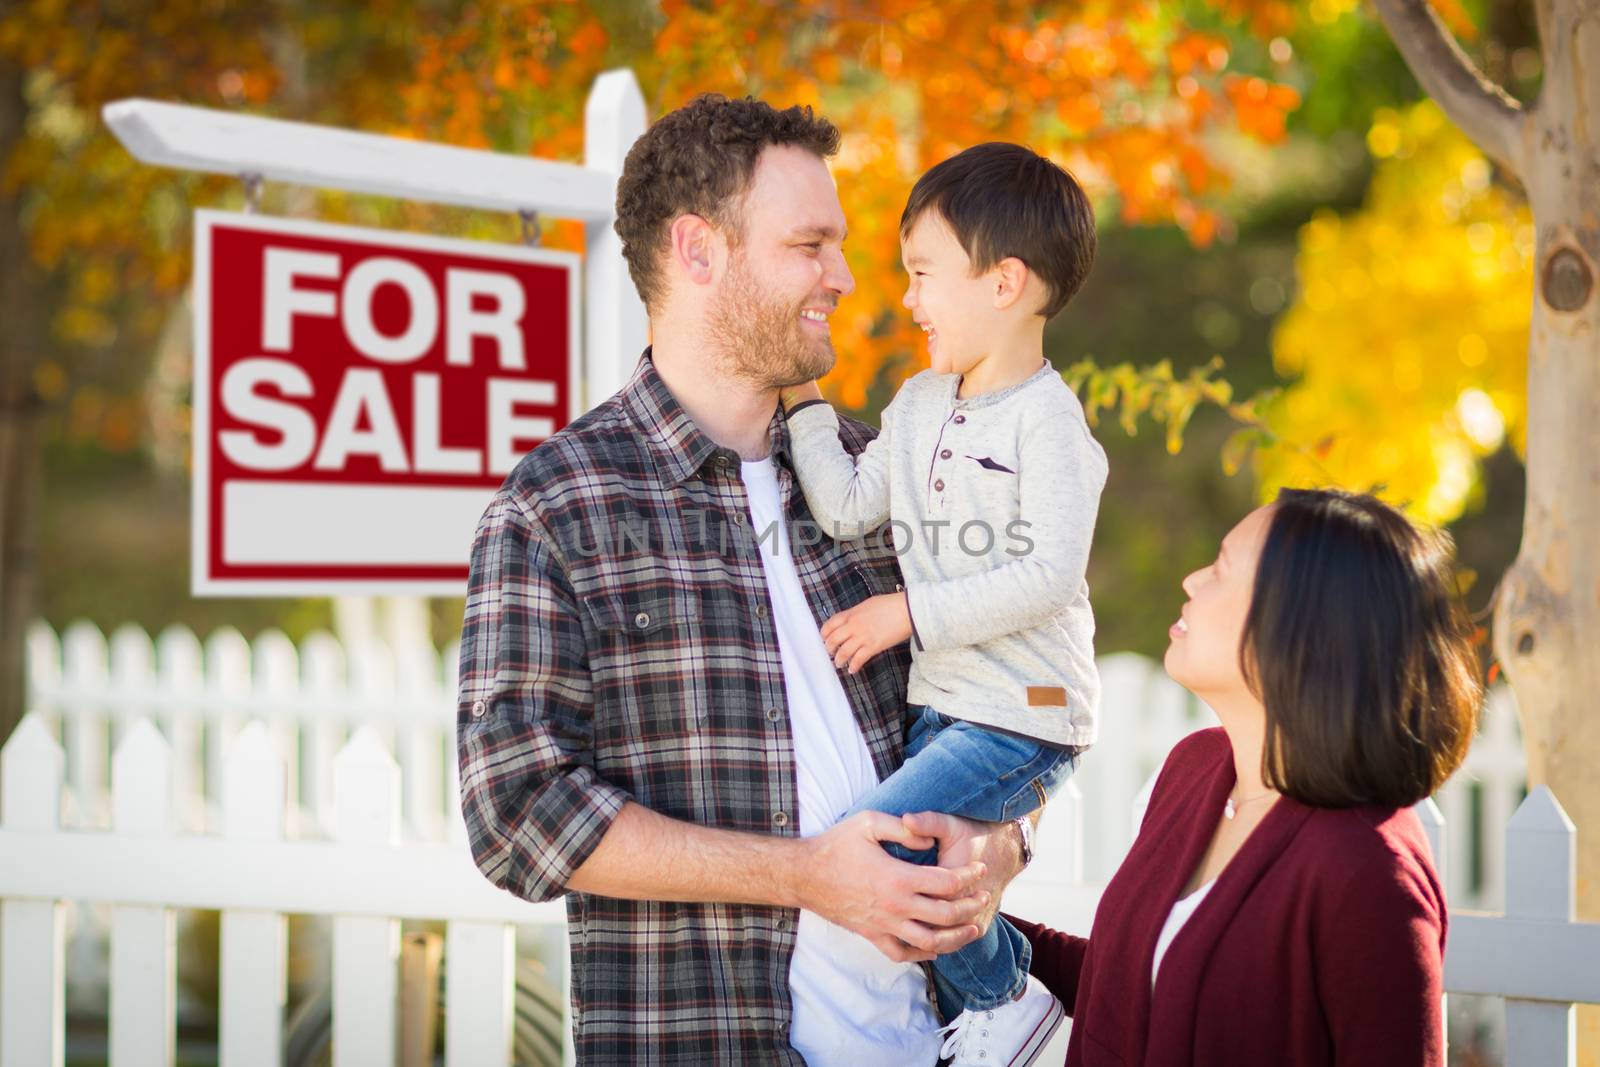 Mixed Race Chinese and Caucasian Parents and Child In Front of Fence and For Sale Real Estate Sign.